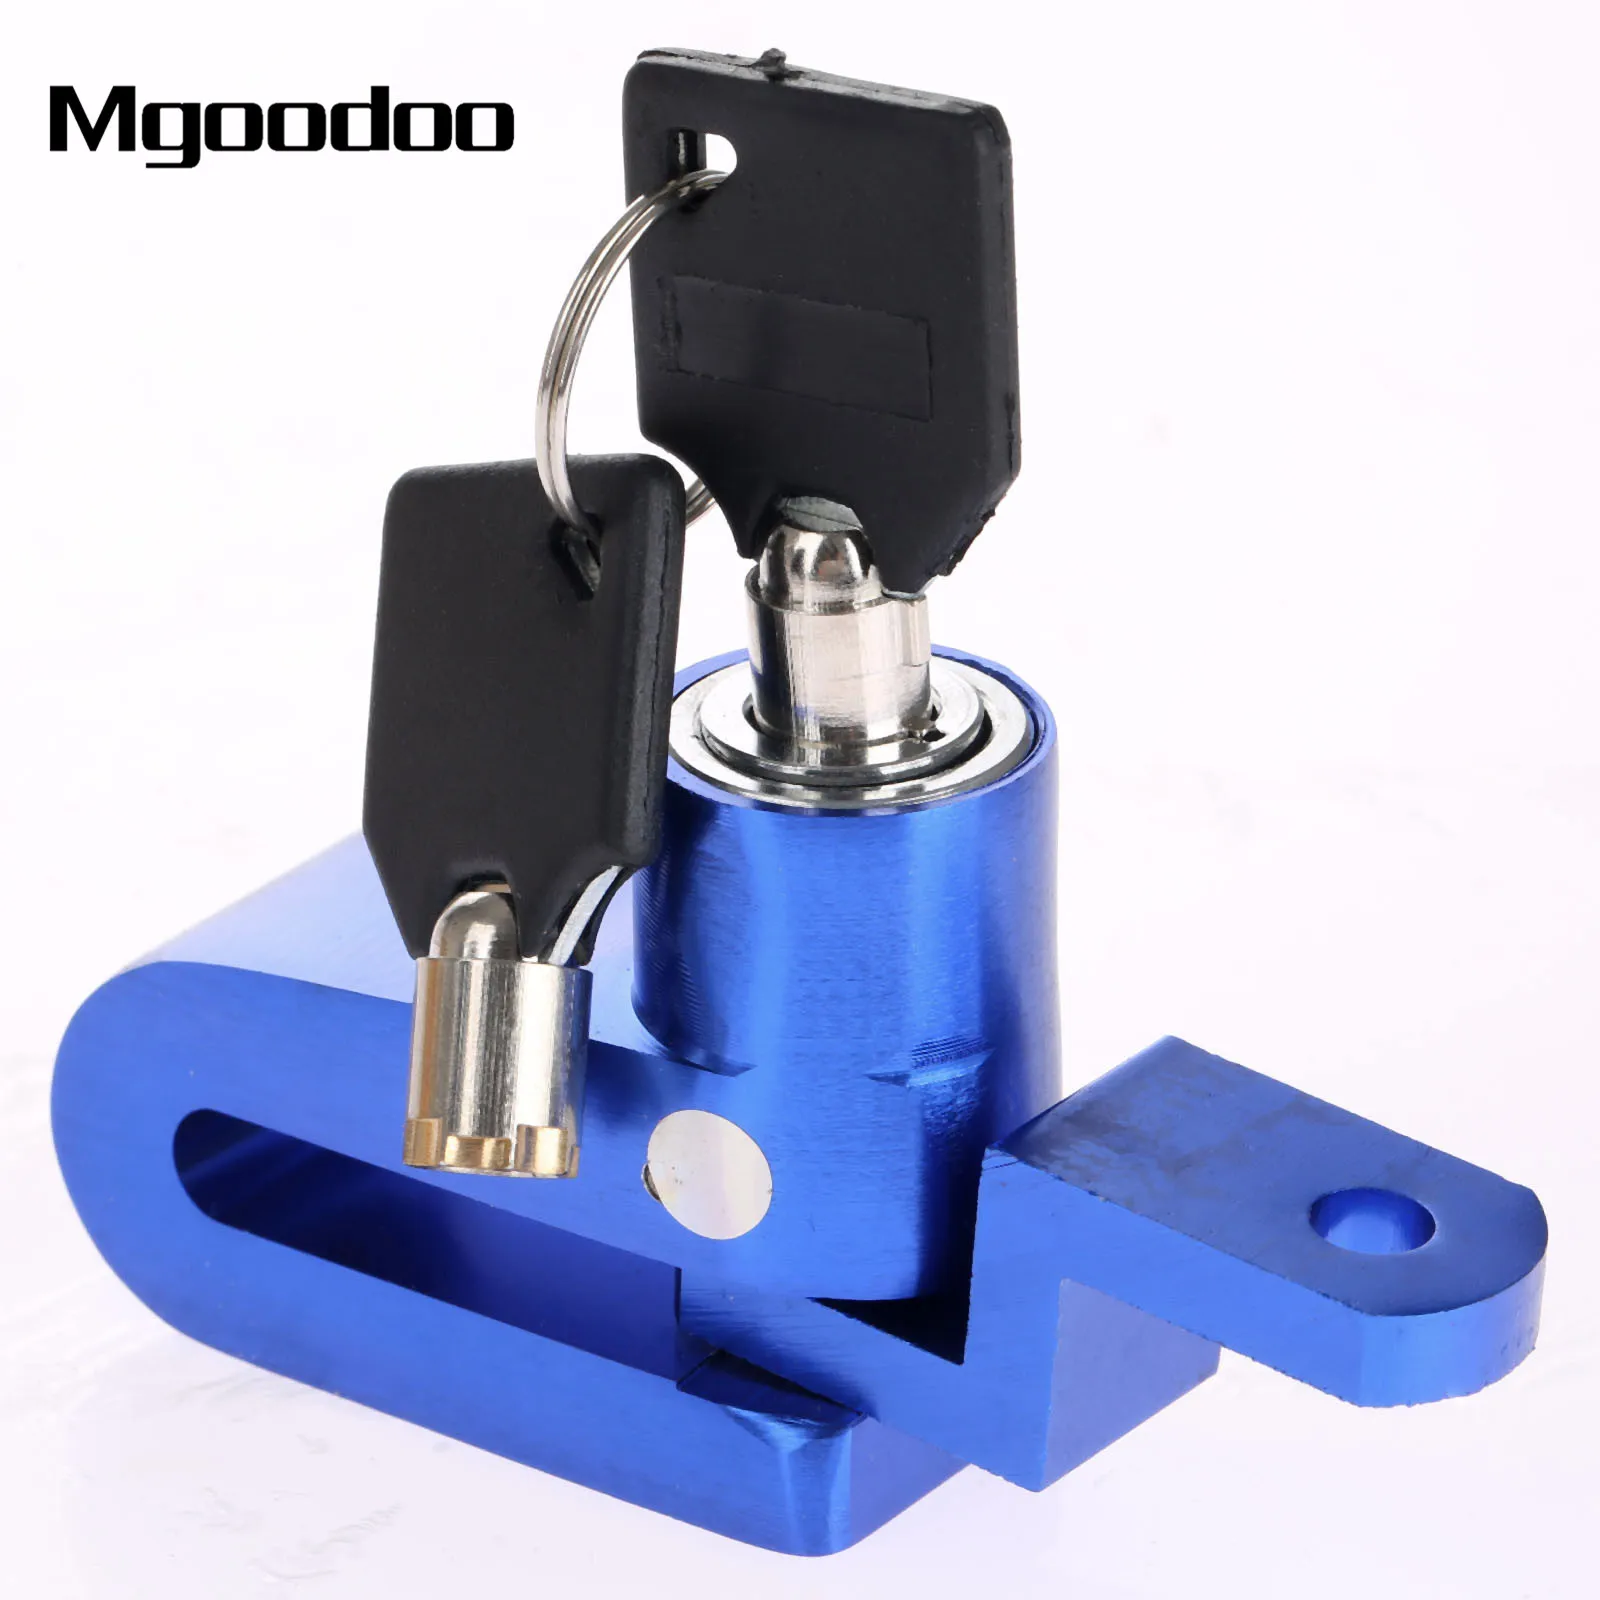 Mgoodoo Motorcycle Bike Bicycle Disc Disk Brake Lock Security Anti-theft Alarm Lock Stainless Alloy Motor Bike Theft Protection plant protection uav landing gear 20 diagonal tripod 25 fixed base 30mm carbon fiber tube clamp aluminum alloy connection